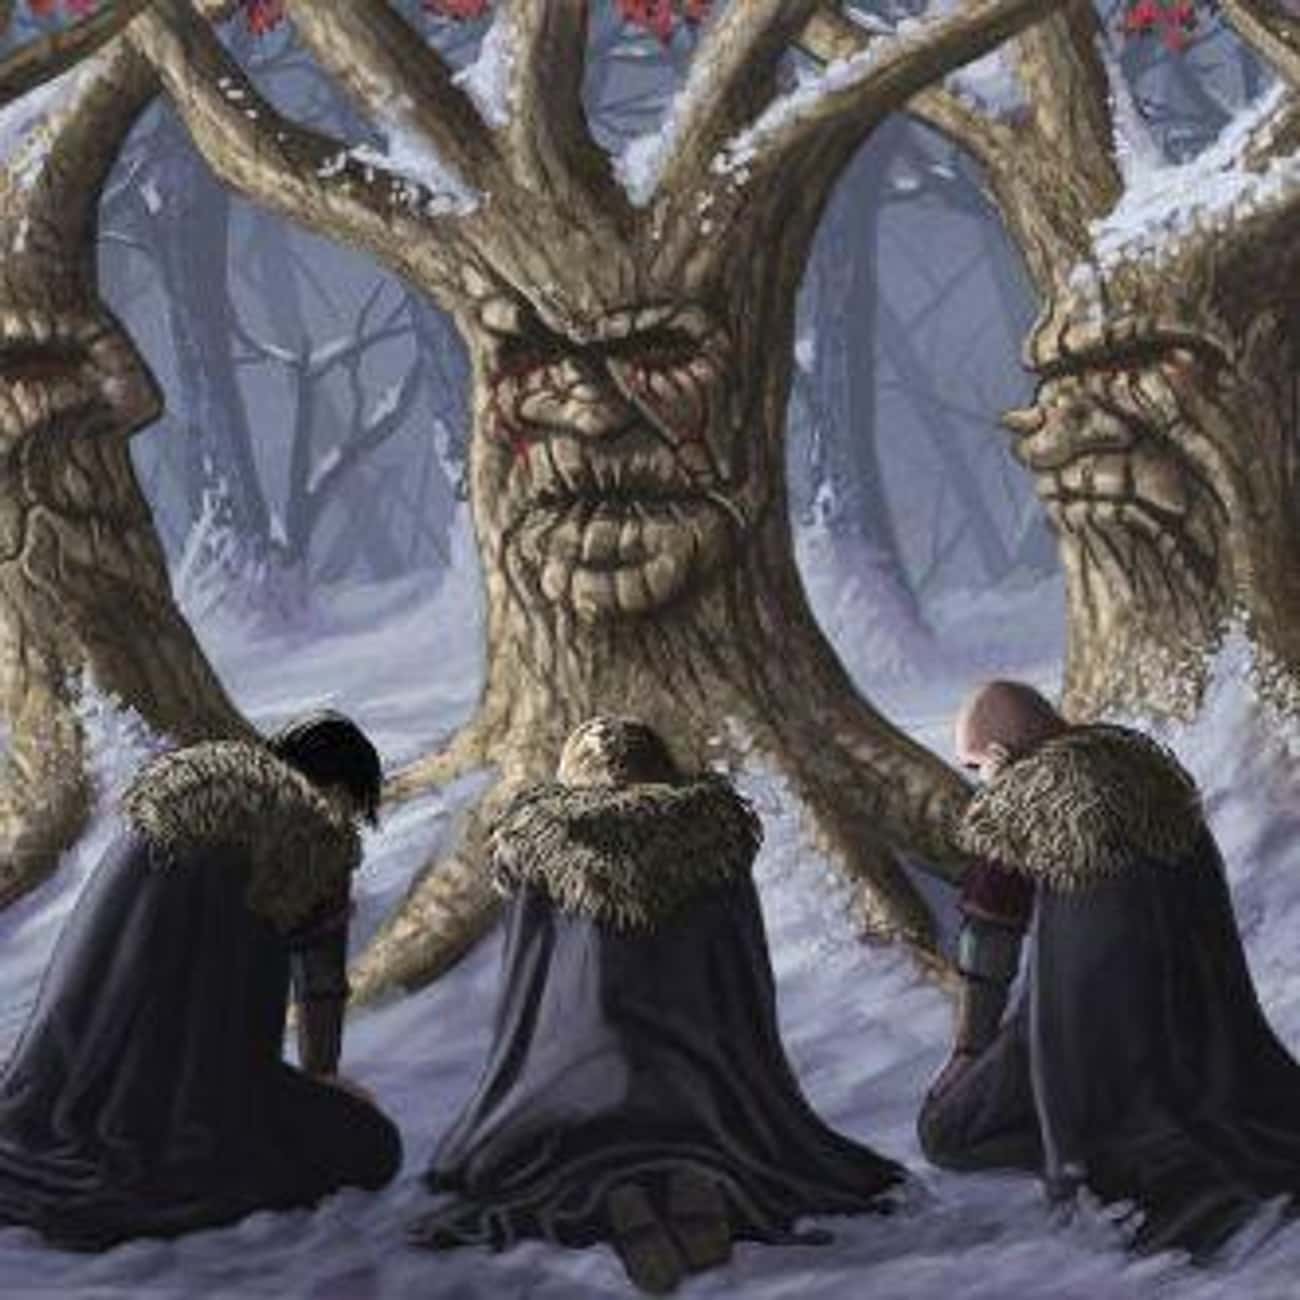 The Old Gods of the Forest